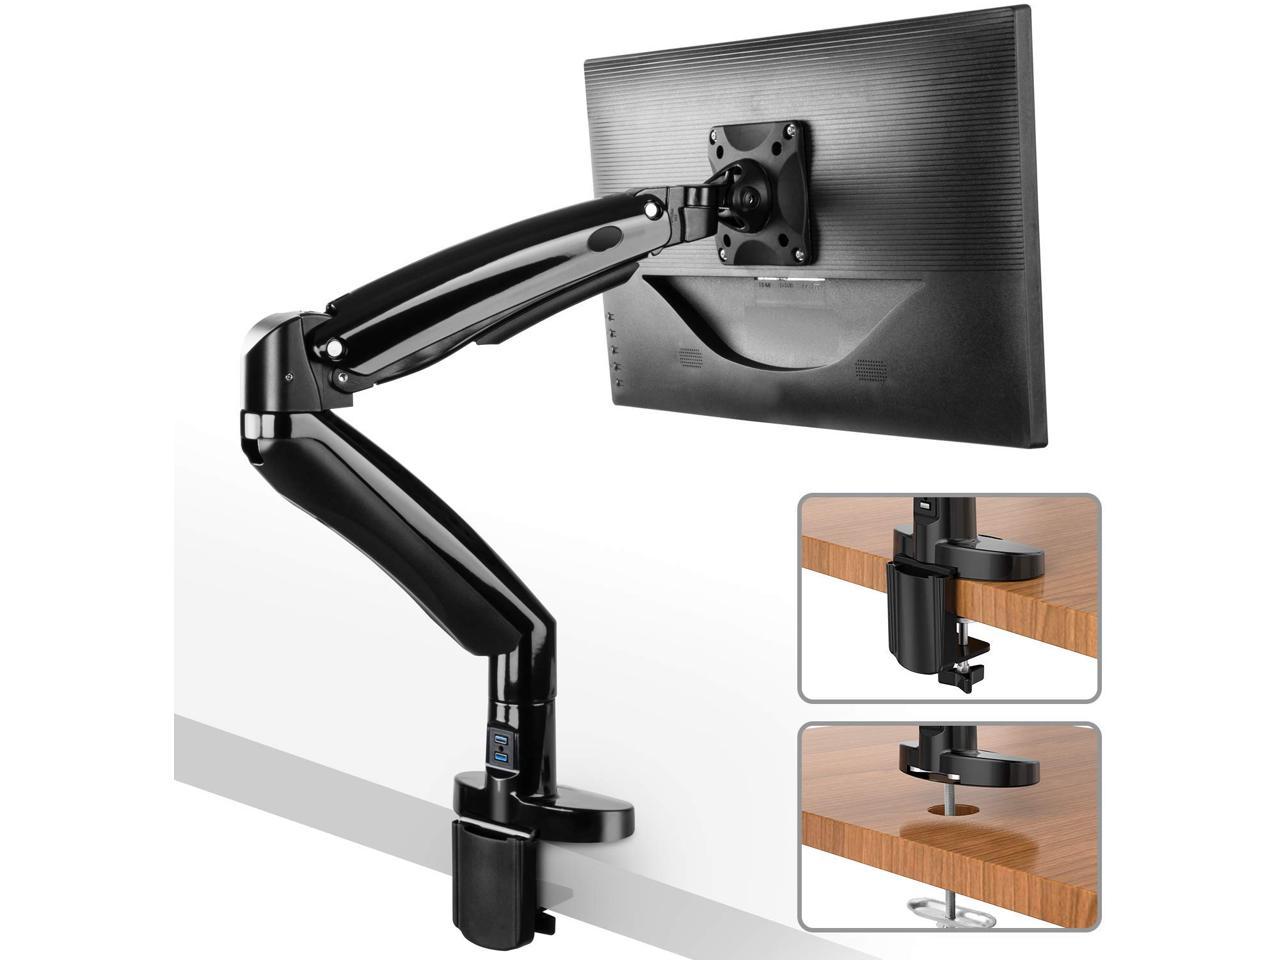 HUANUO Single Monitor Stand Height Adjustable VESA Bracket with Clamp Hold up to 19.8lbs Gas Spring Single Arm Monitor Desk Mount Fit 17 to 32 inch Screens Grommet Mounting Base 